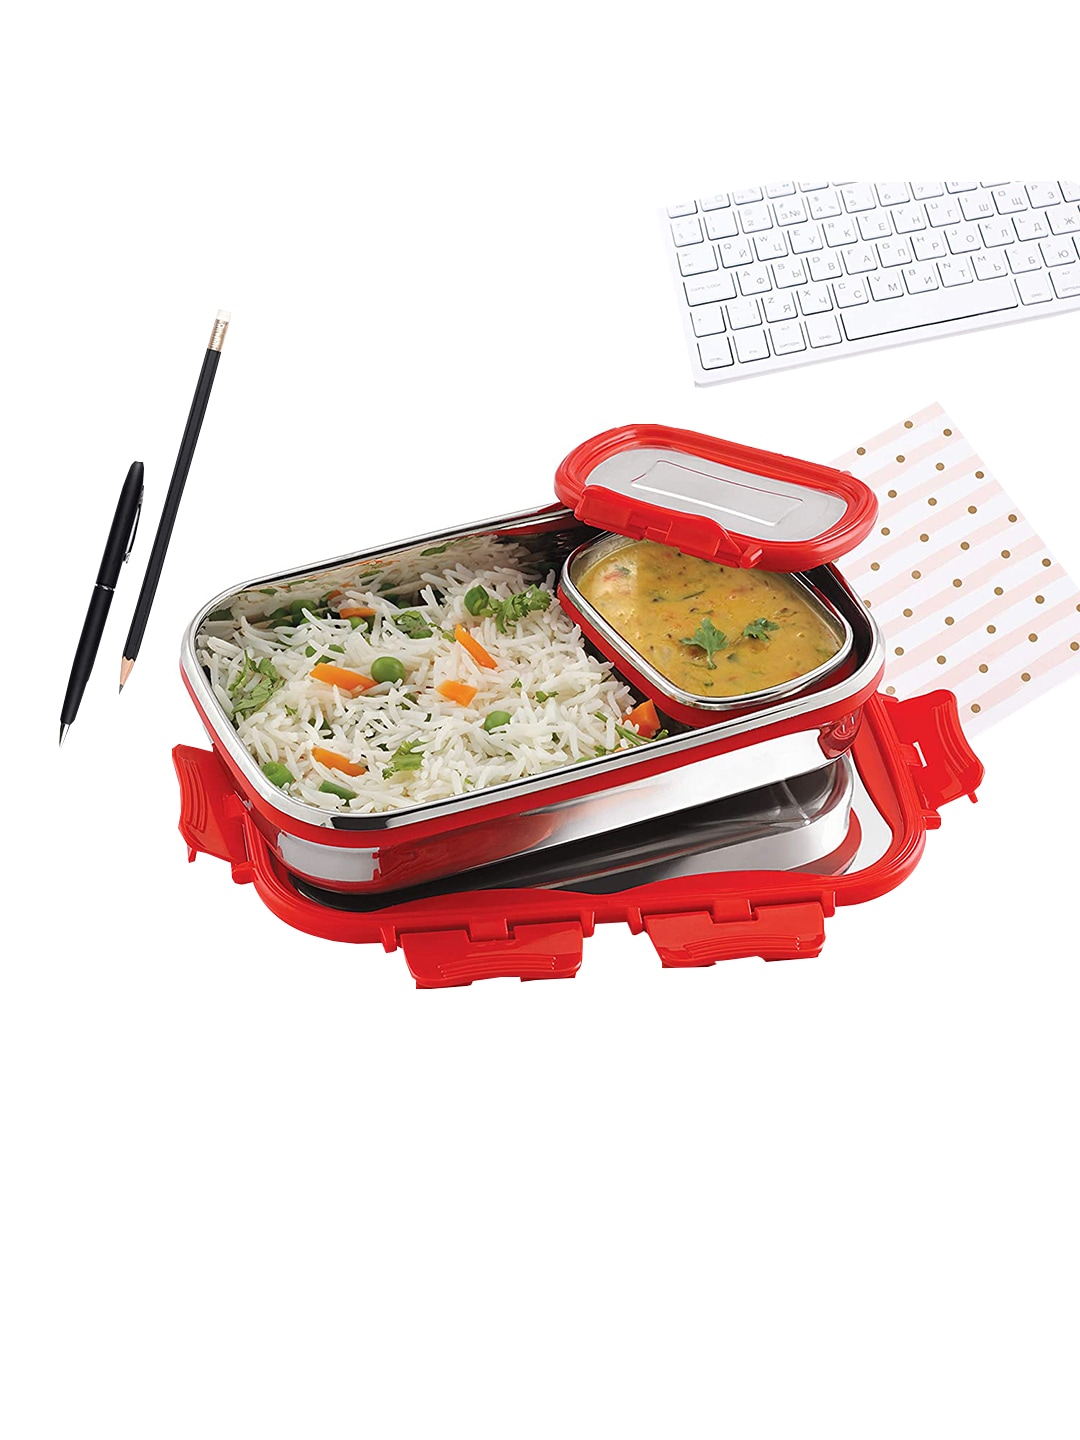 Cello Red & Silver-Toned Solid Stainless Steel Lunch Box Price in India